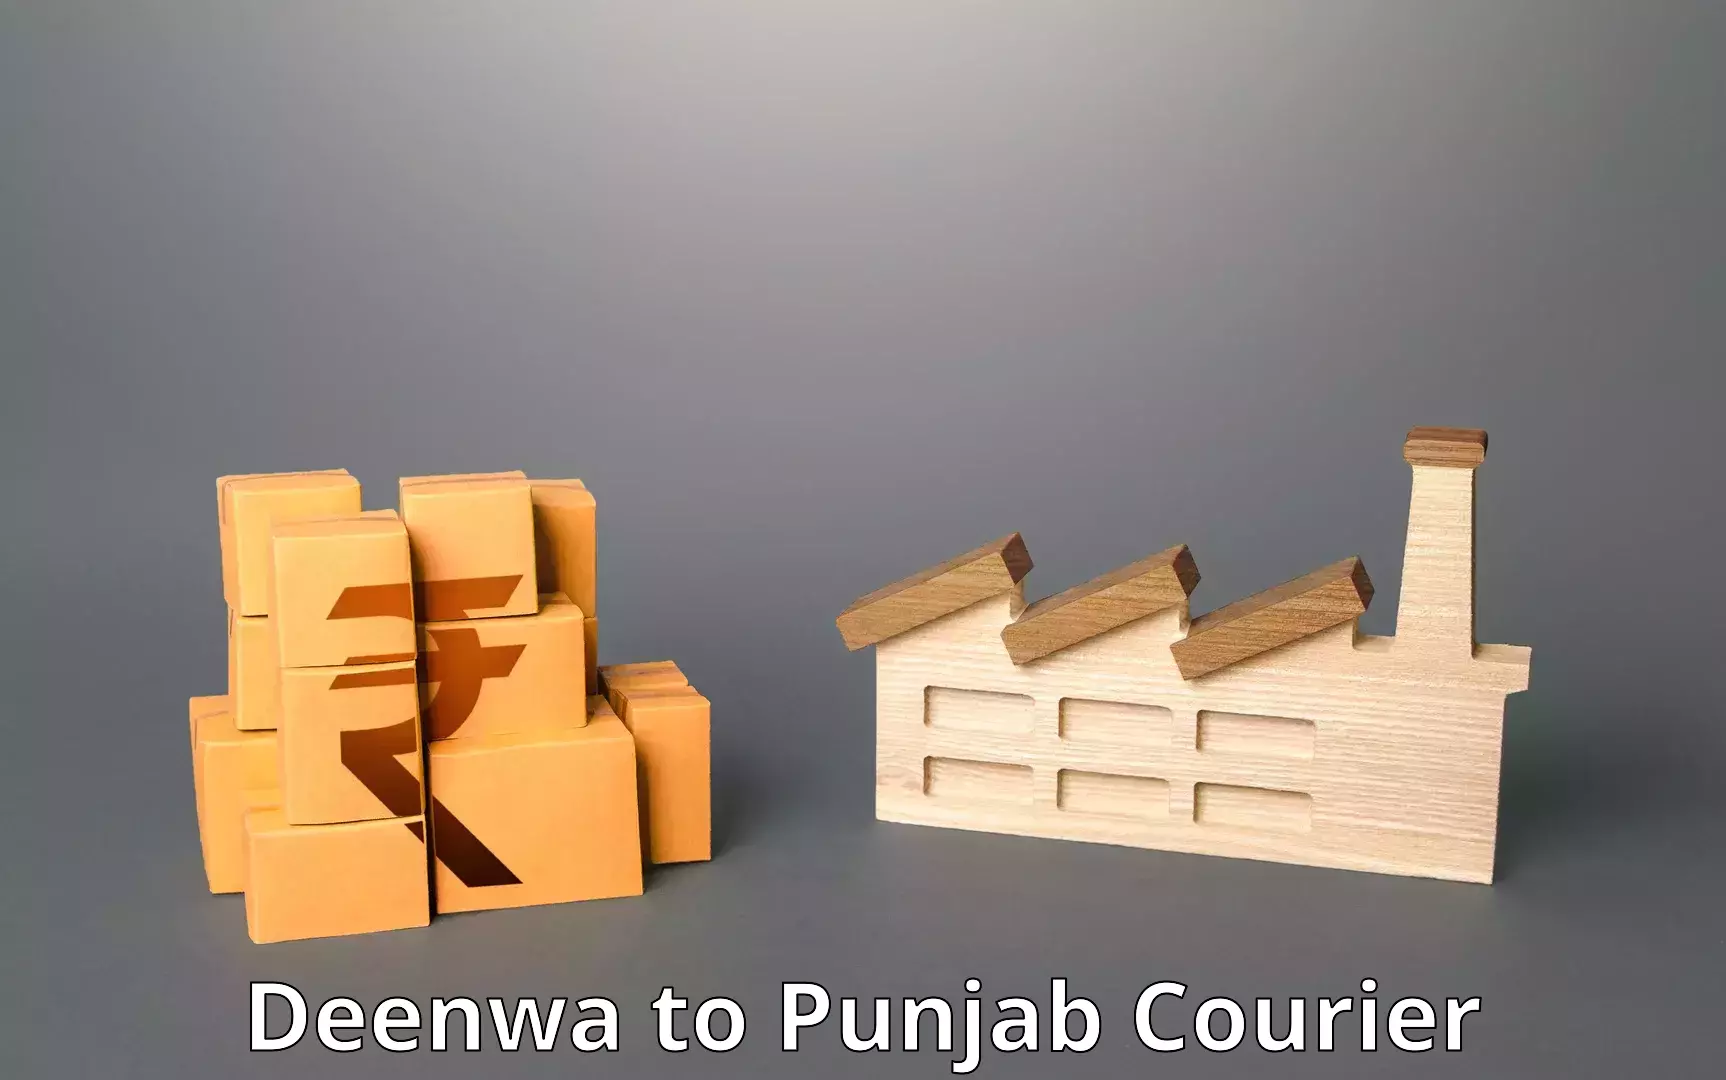 Rural area delivery Deenwa to Central University of Punjab Bathinda